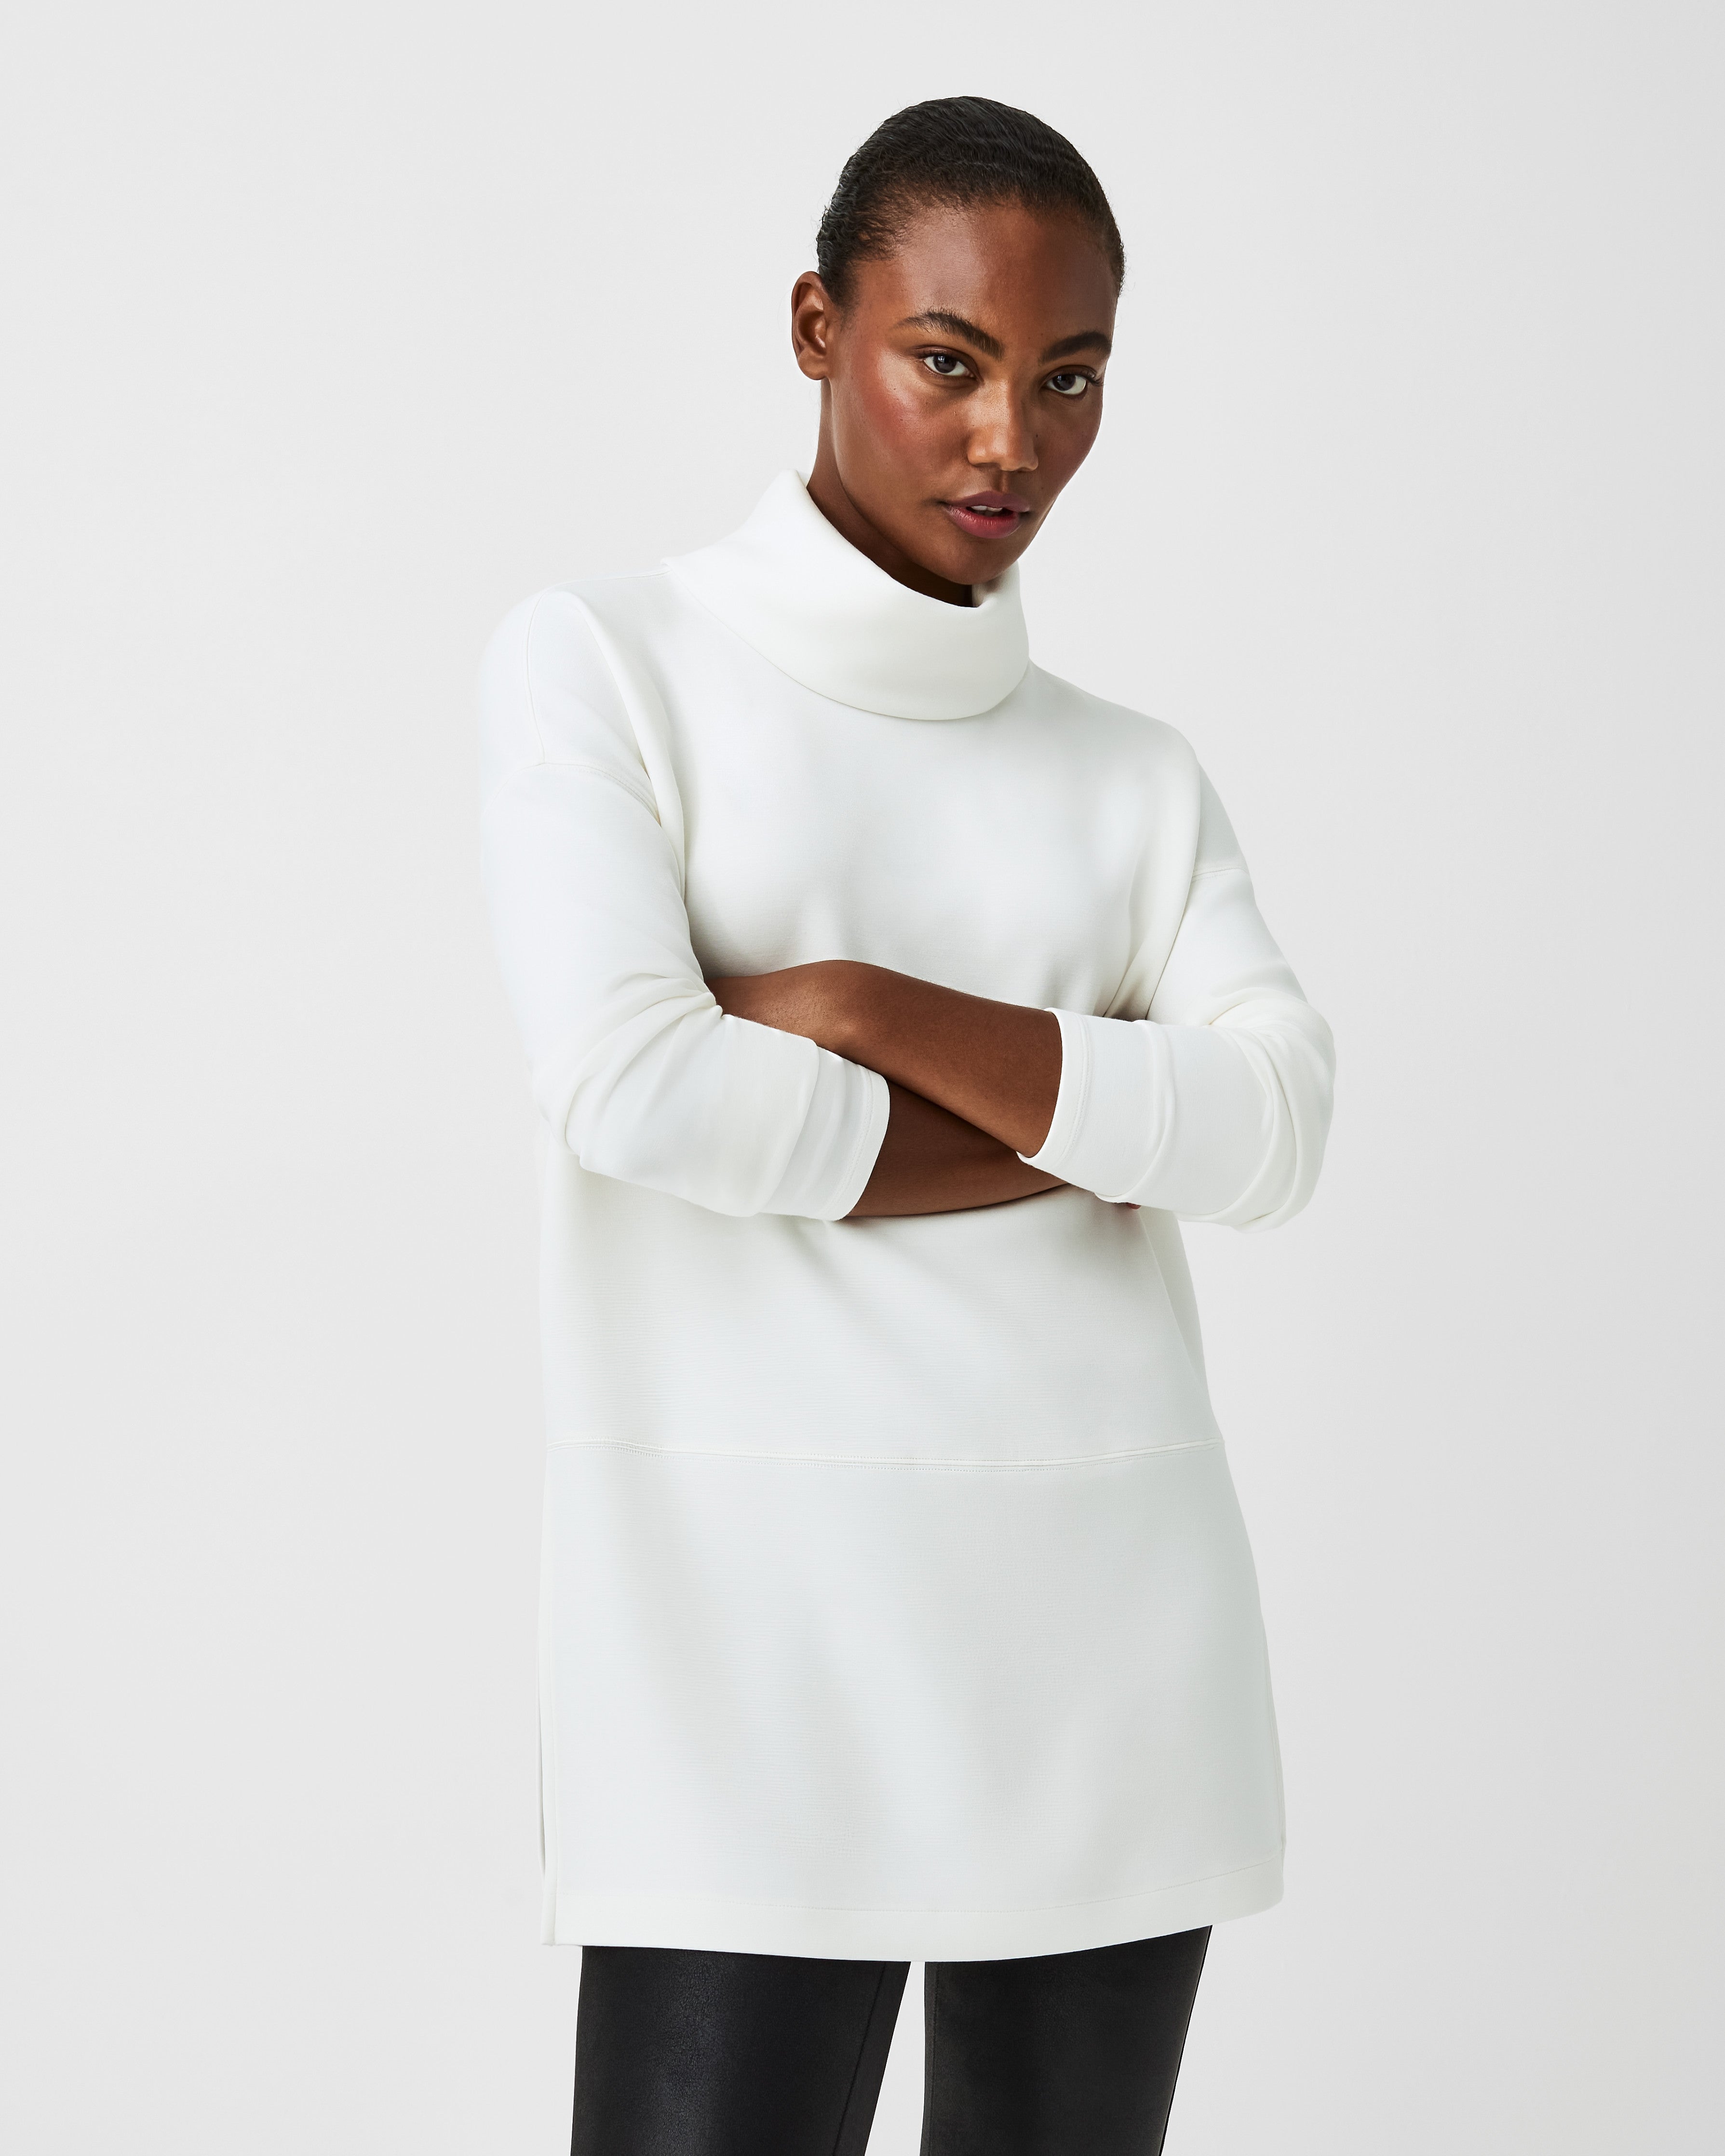 I've been waiting for this new AirEssentials Turtleneck Tunic for